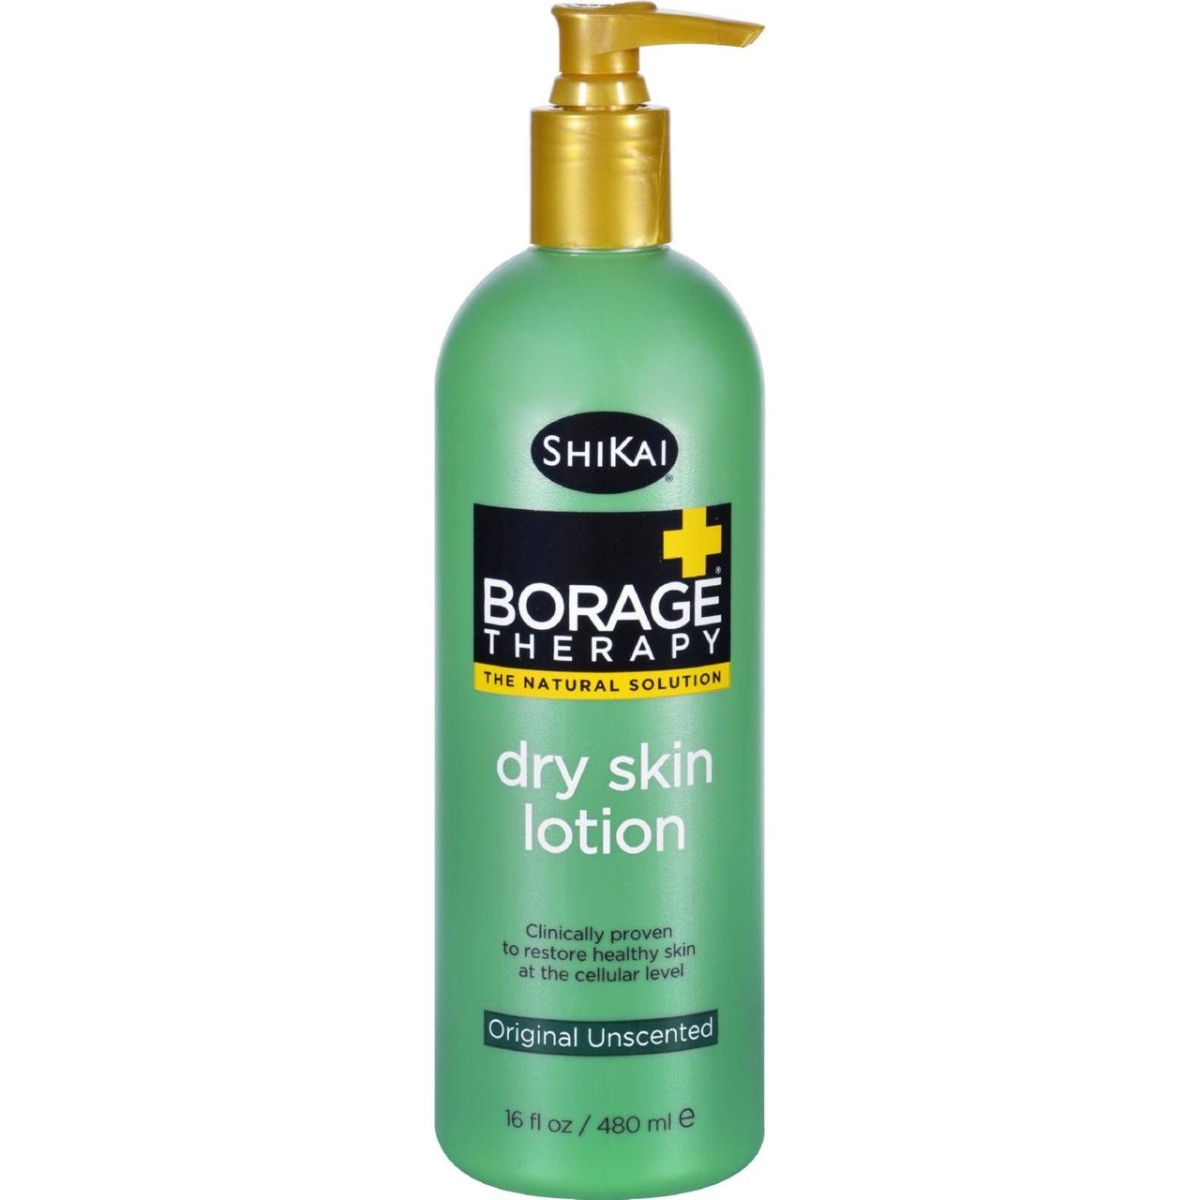 Hg0947622 16 Fl Oz Borage Therapy Dry Skin Lotion - Unscented